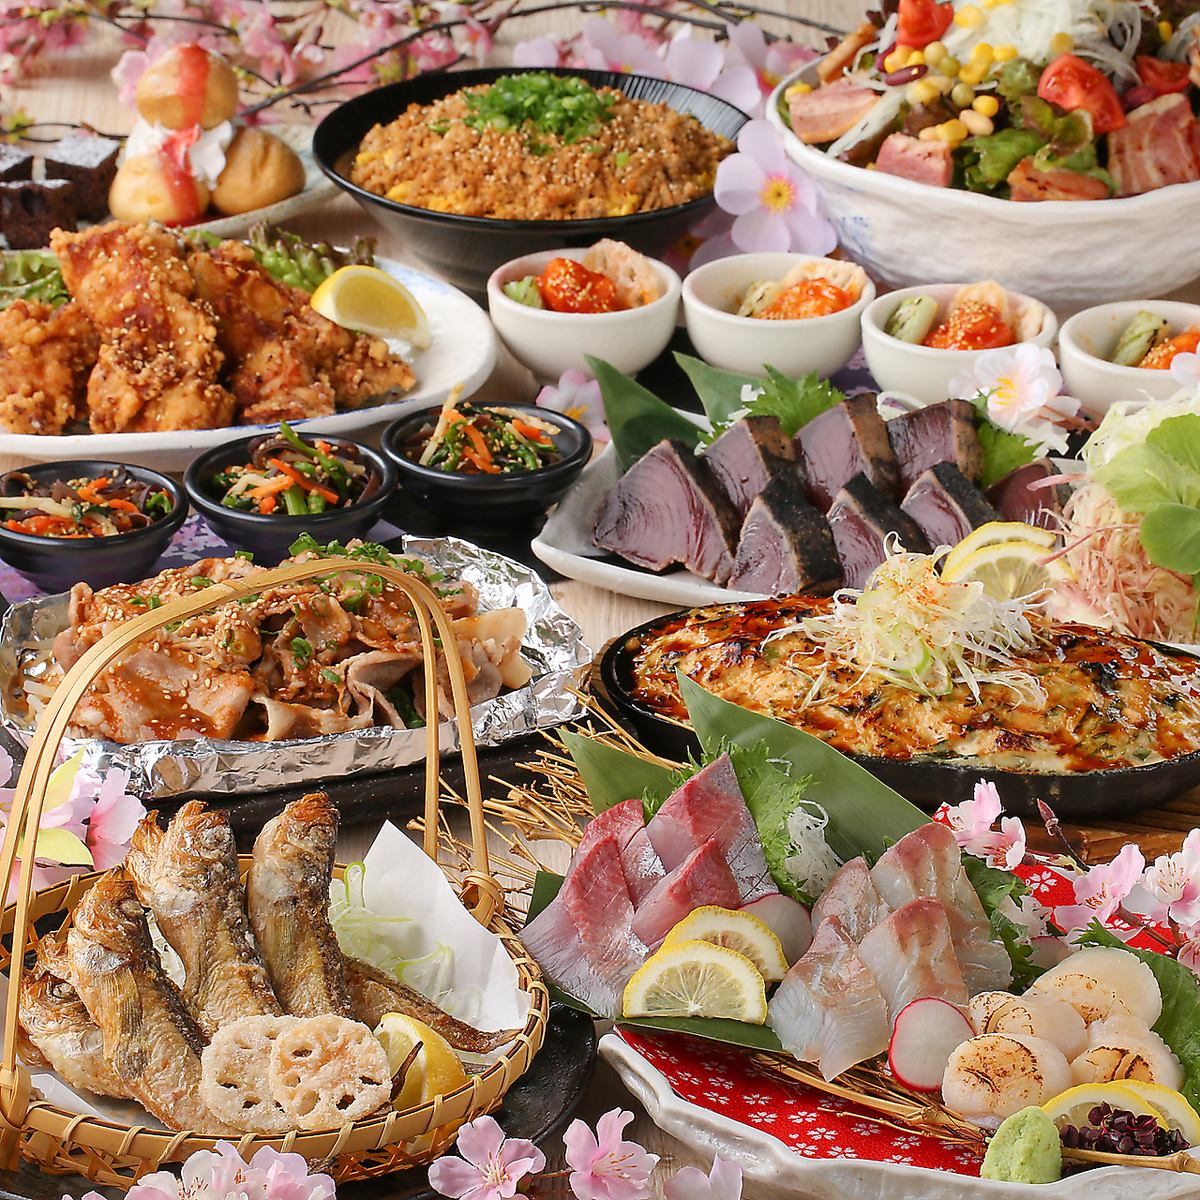 Overwhelming quality! All-you-can-eat and drink around 720 dishes using Kochi specialties and luxury ingredients